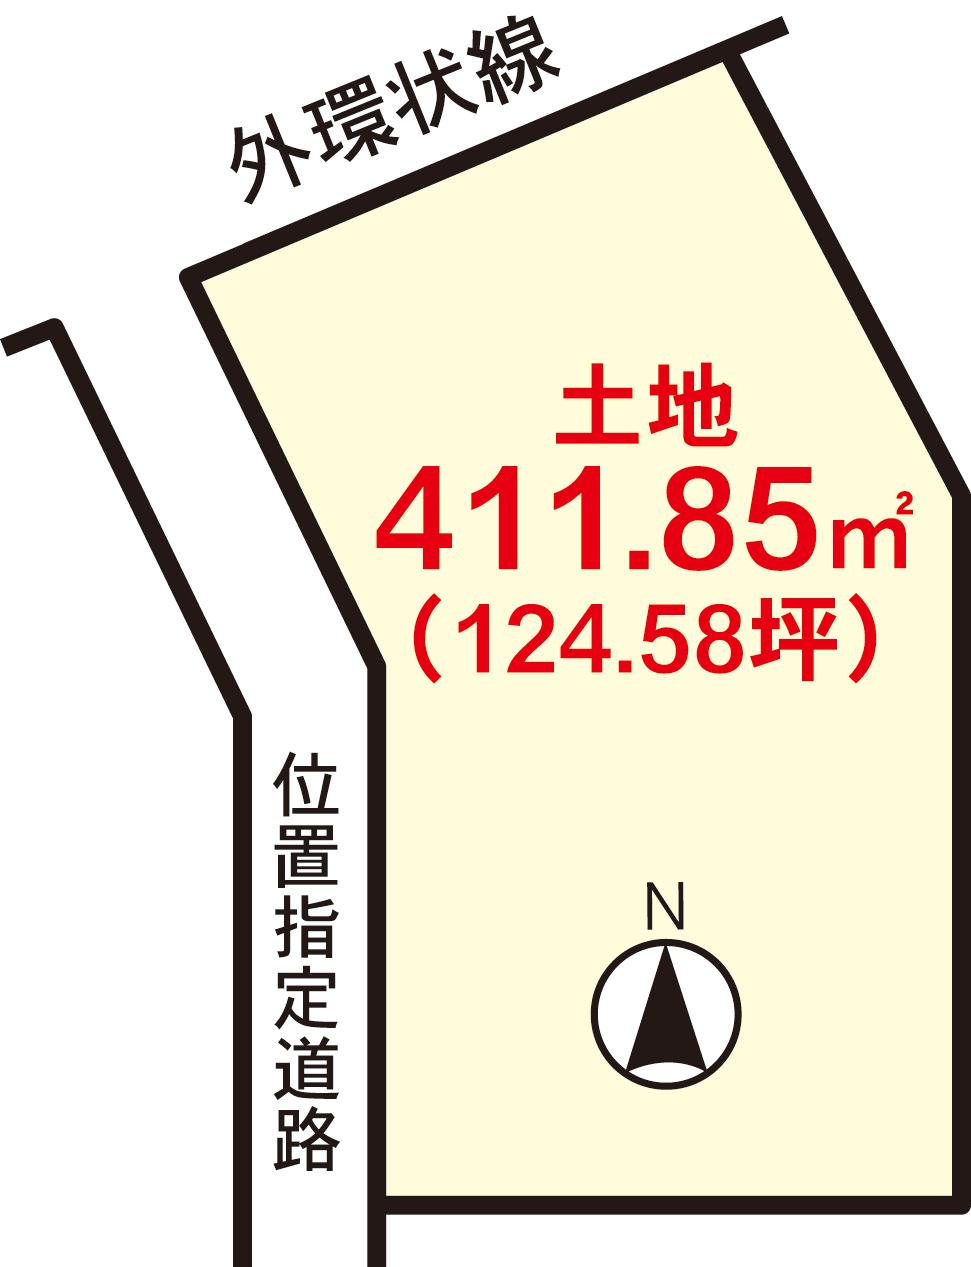 Compartment figure. Land price 125 million yen, Siemens to land area 411.85 sq m outside the loop line, Neighborhood commercial district